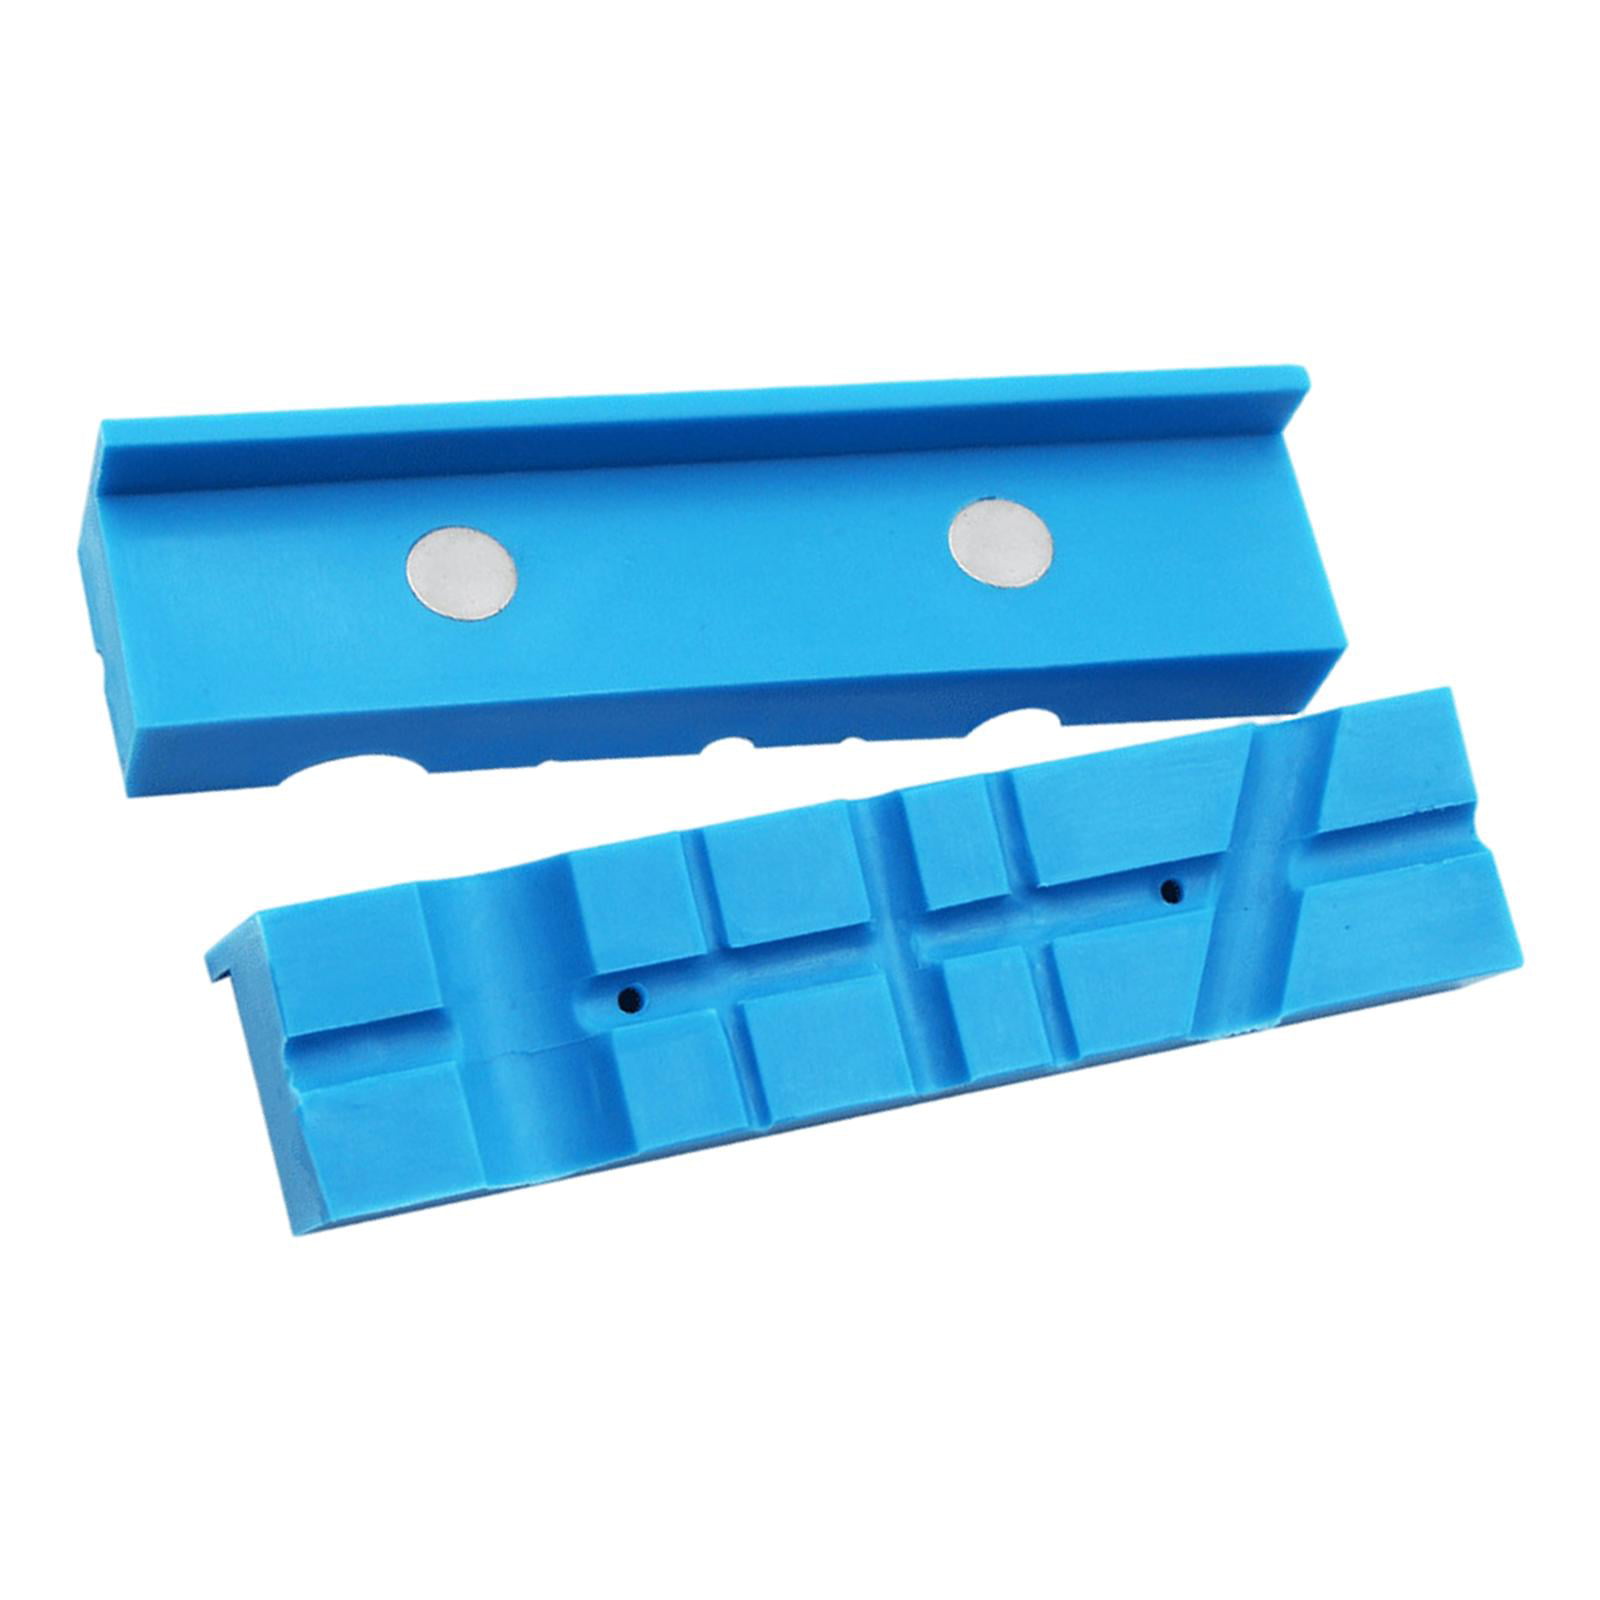 3046 2 Pack Plastic Bench Vice Jaw Protector BGS 125 mm Long 